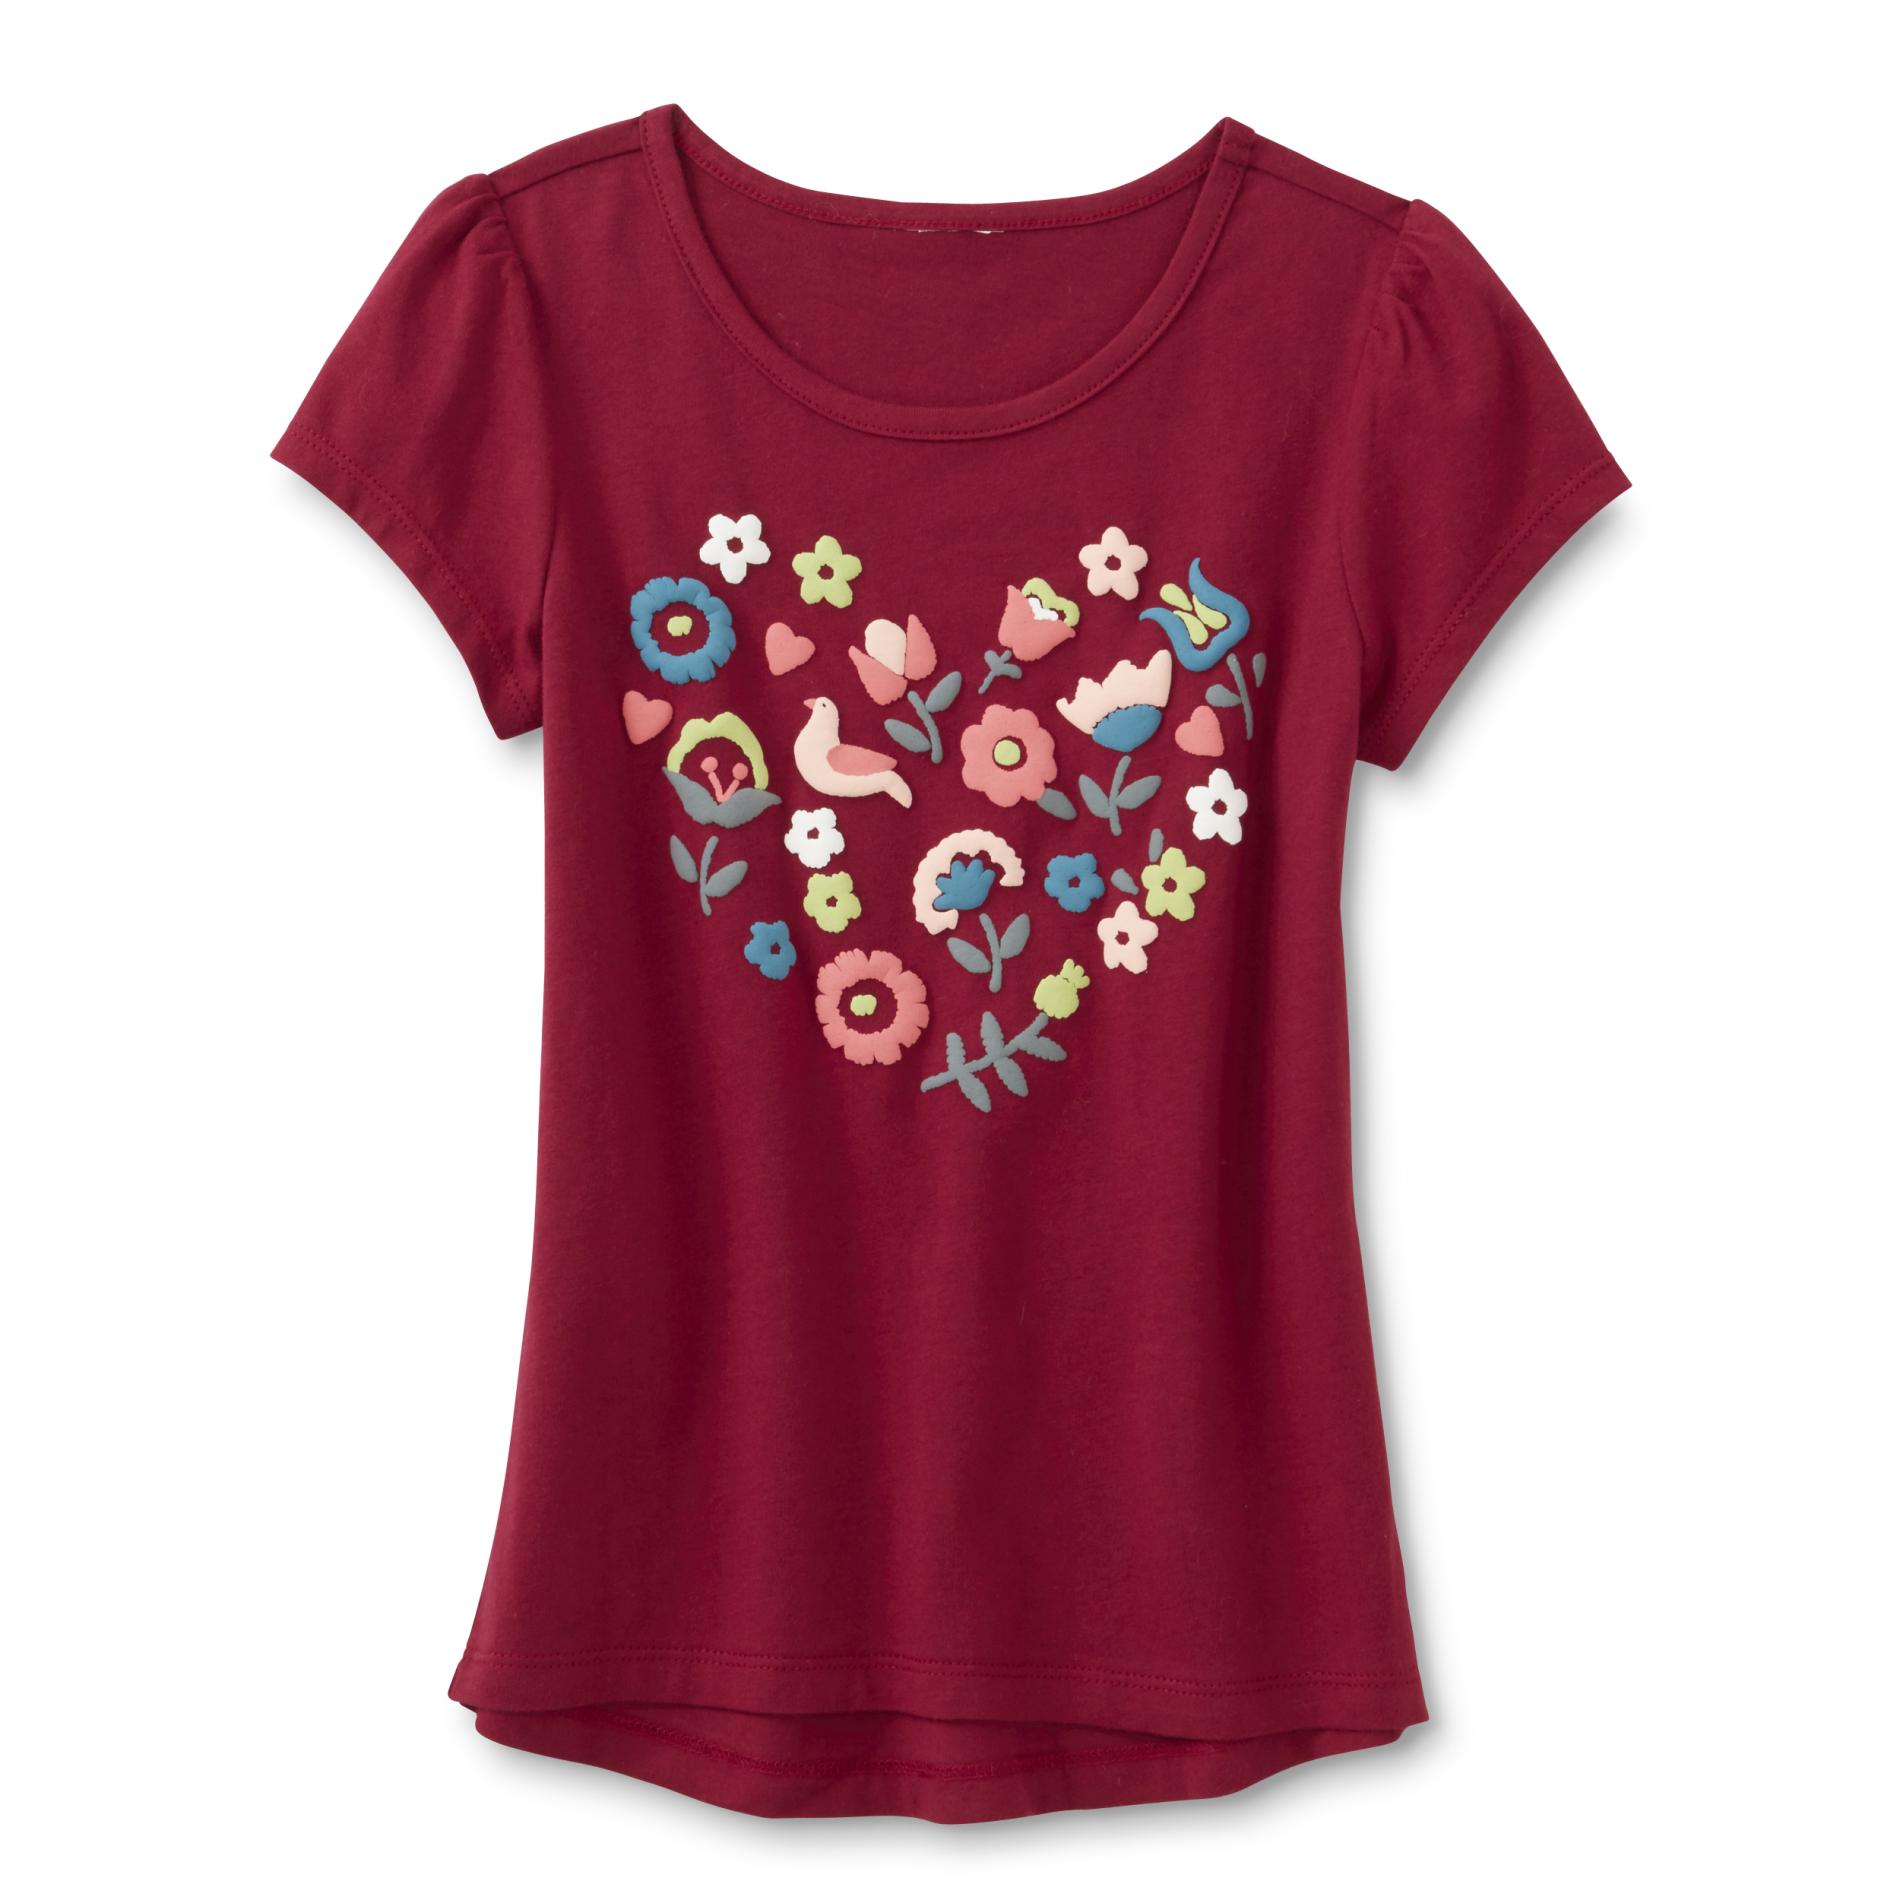 Toughskins Infant & Toddler Girl's Graphic T-Shirt - Floral Heart